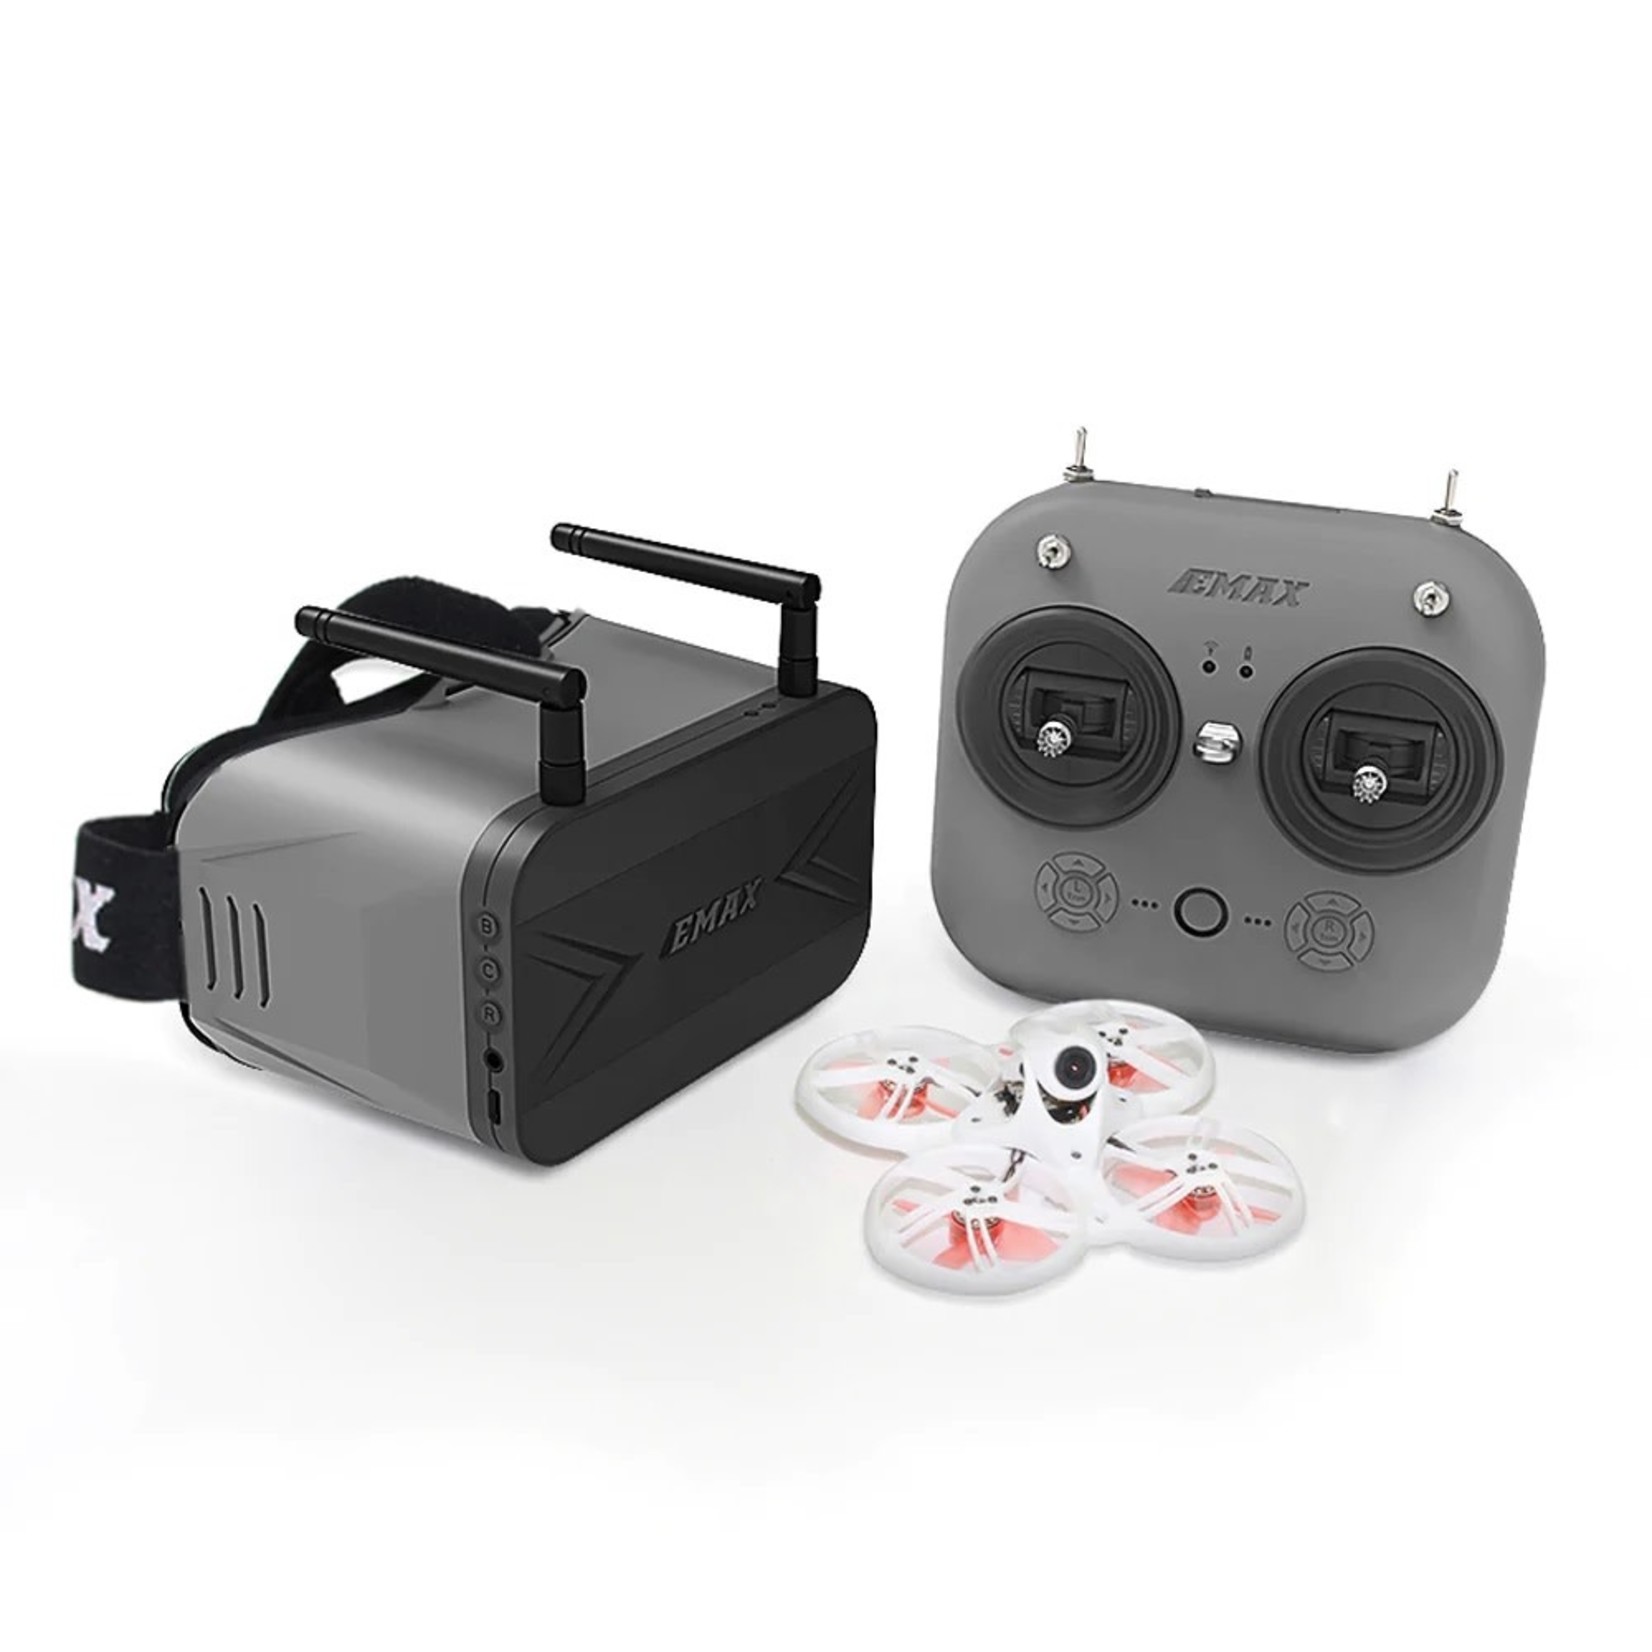 EMAX EMAX USA Tinyhawk III FPV Racing Drone - Ready to Fly (RTF) w/Controller and Goggles #0110001121